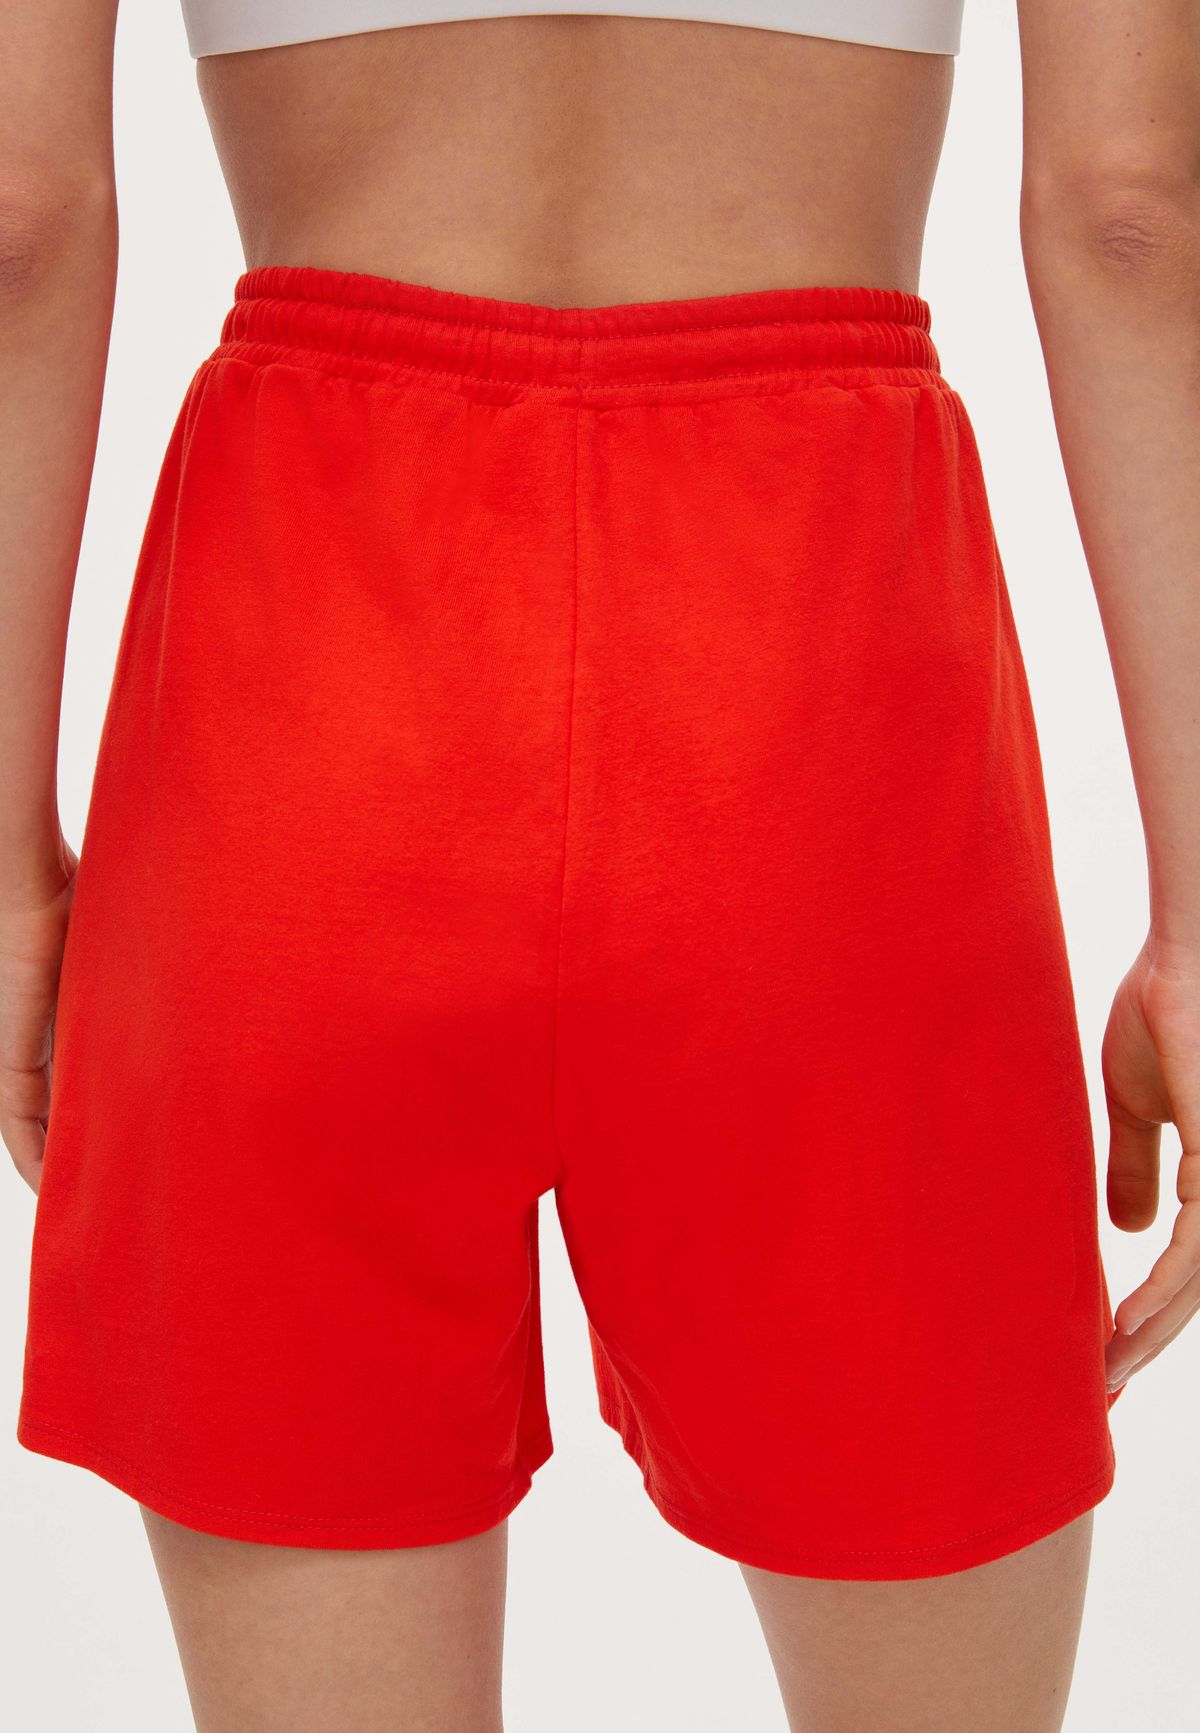 Cotton Retro Shorts, Fiery Red